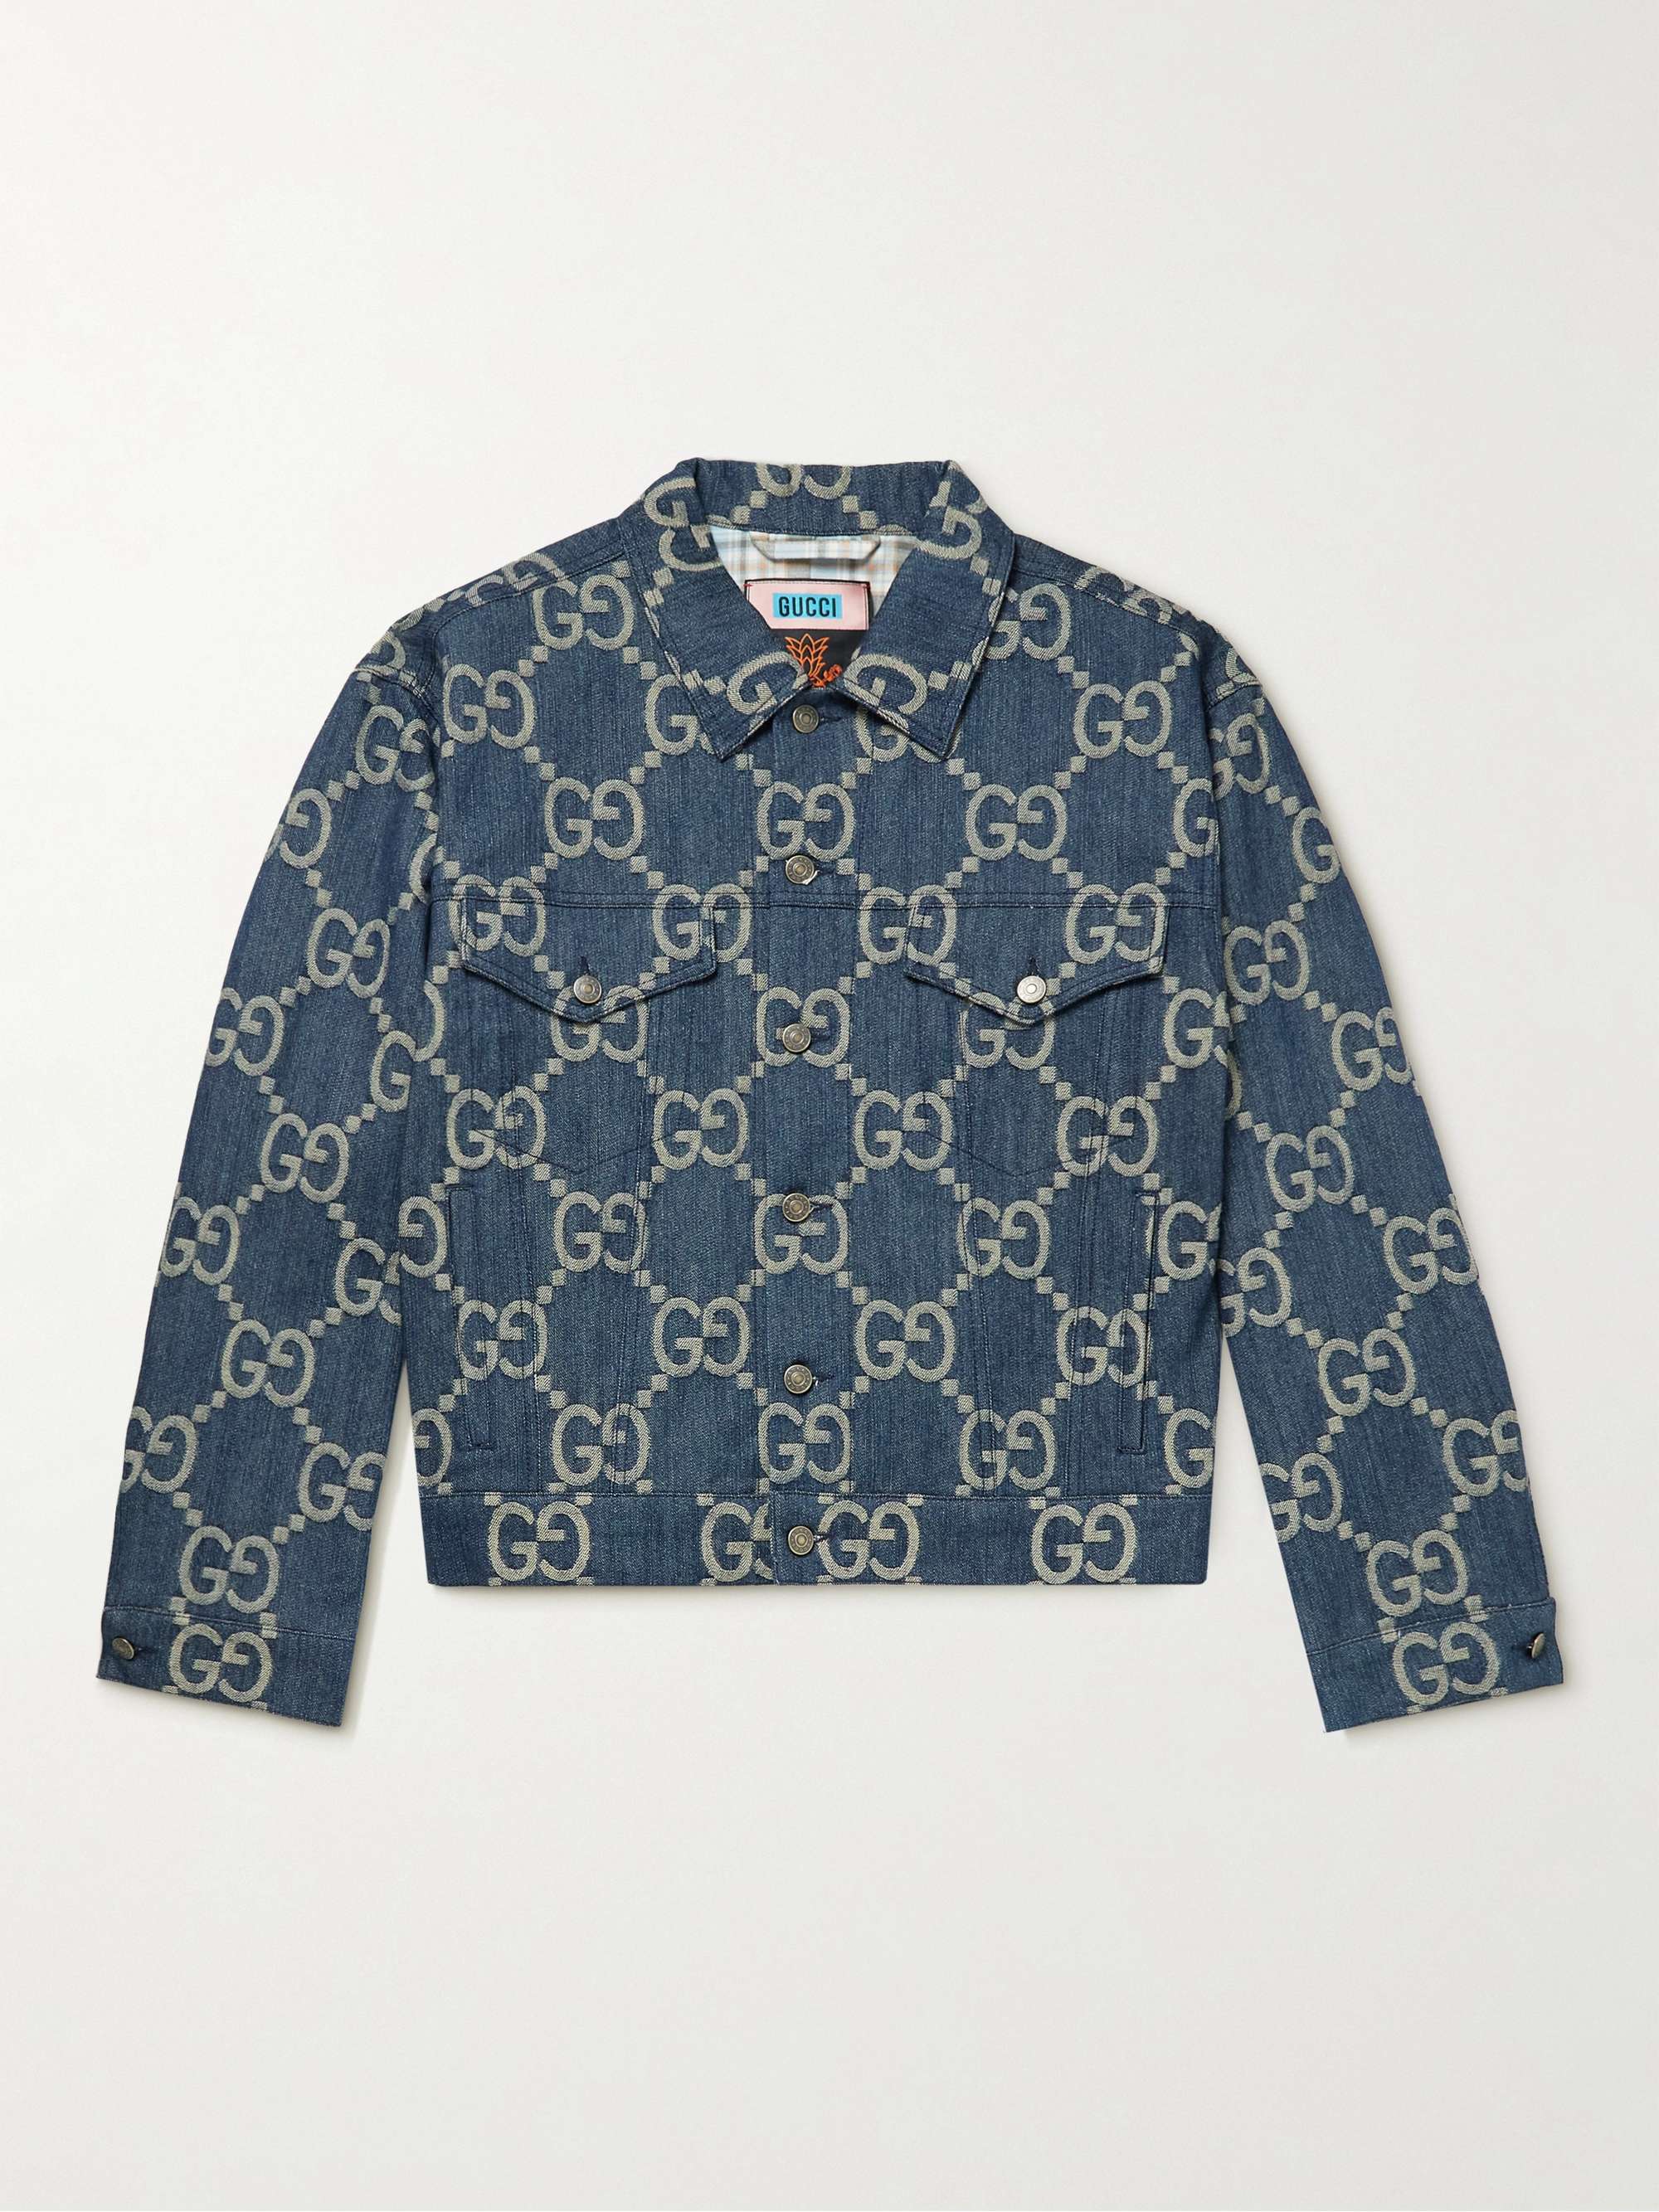 in the meantime Stick out As far as people are concerned Blue Slim-Fit Logo-Jacquard Denim Jacket | GUCCI | MR PORTER